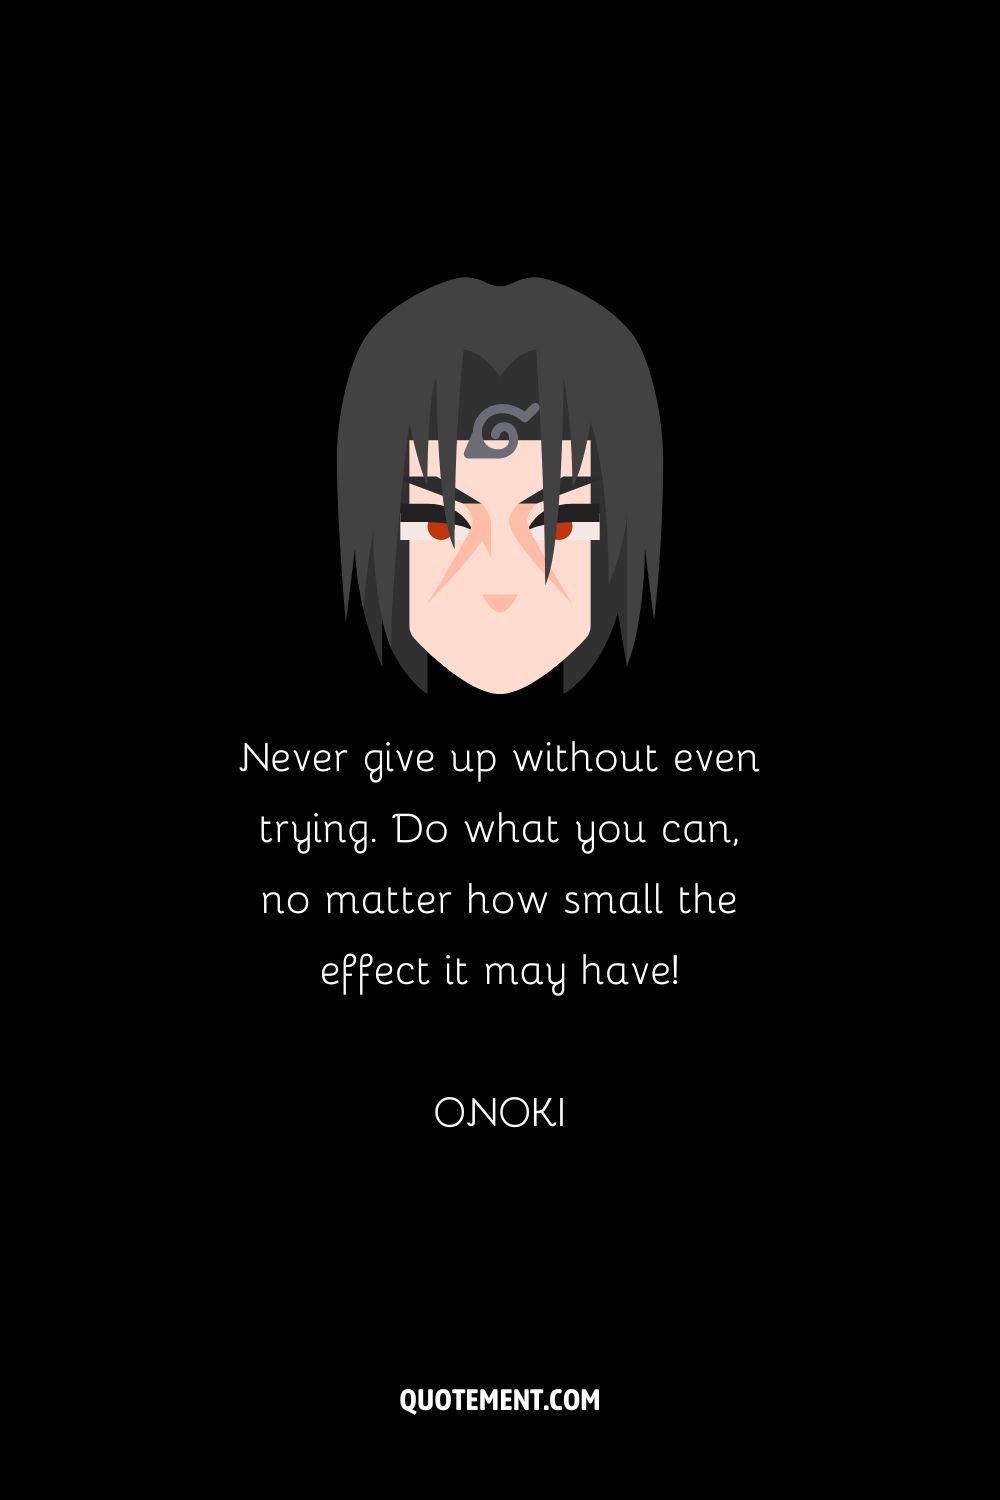 “Never give up without even trying. Do what you can, no matter how small the effect it may have!” — Onoki